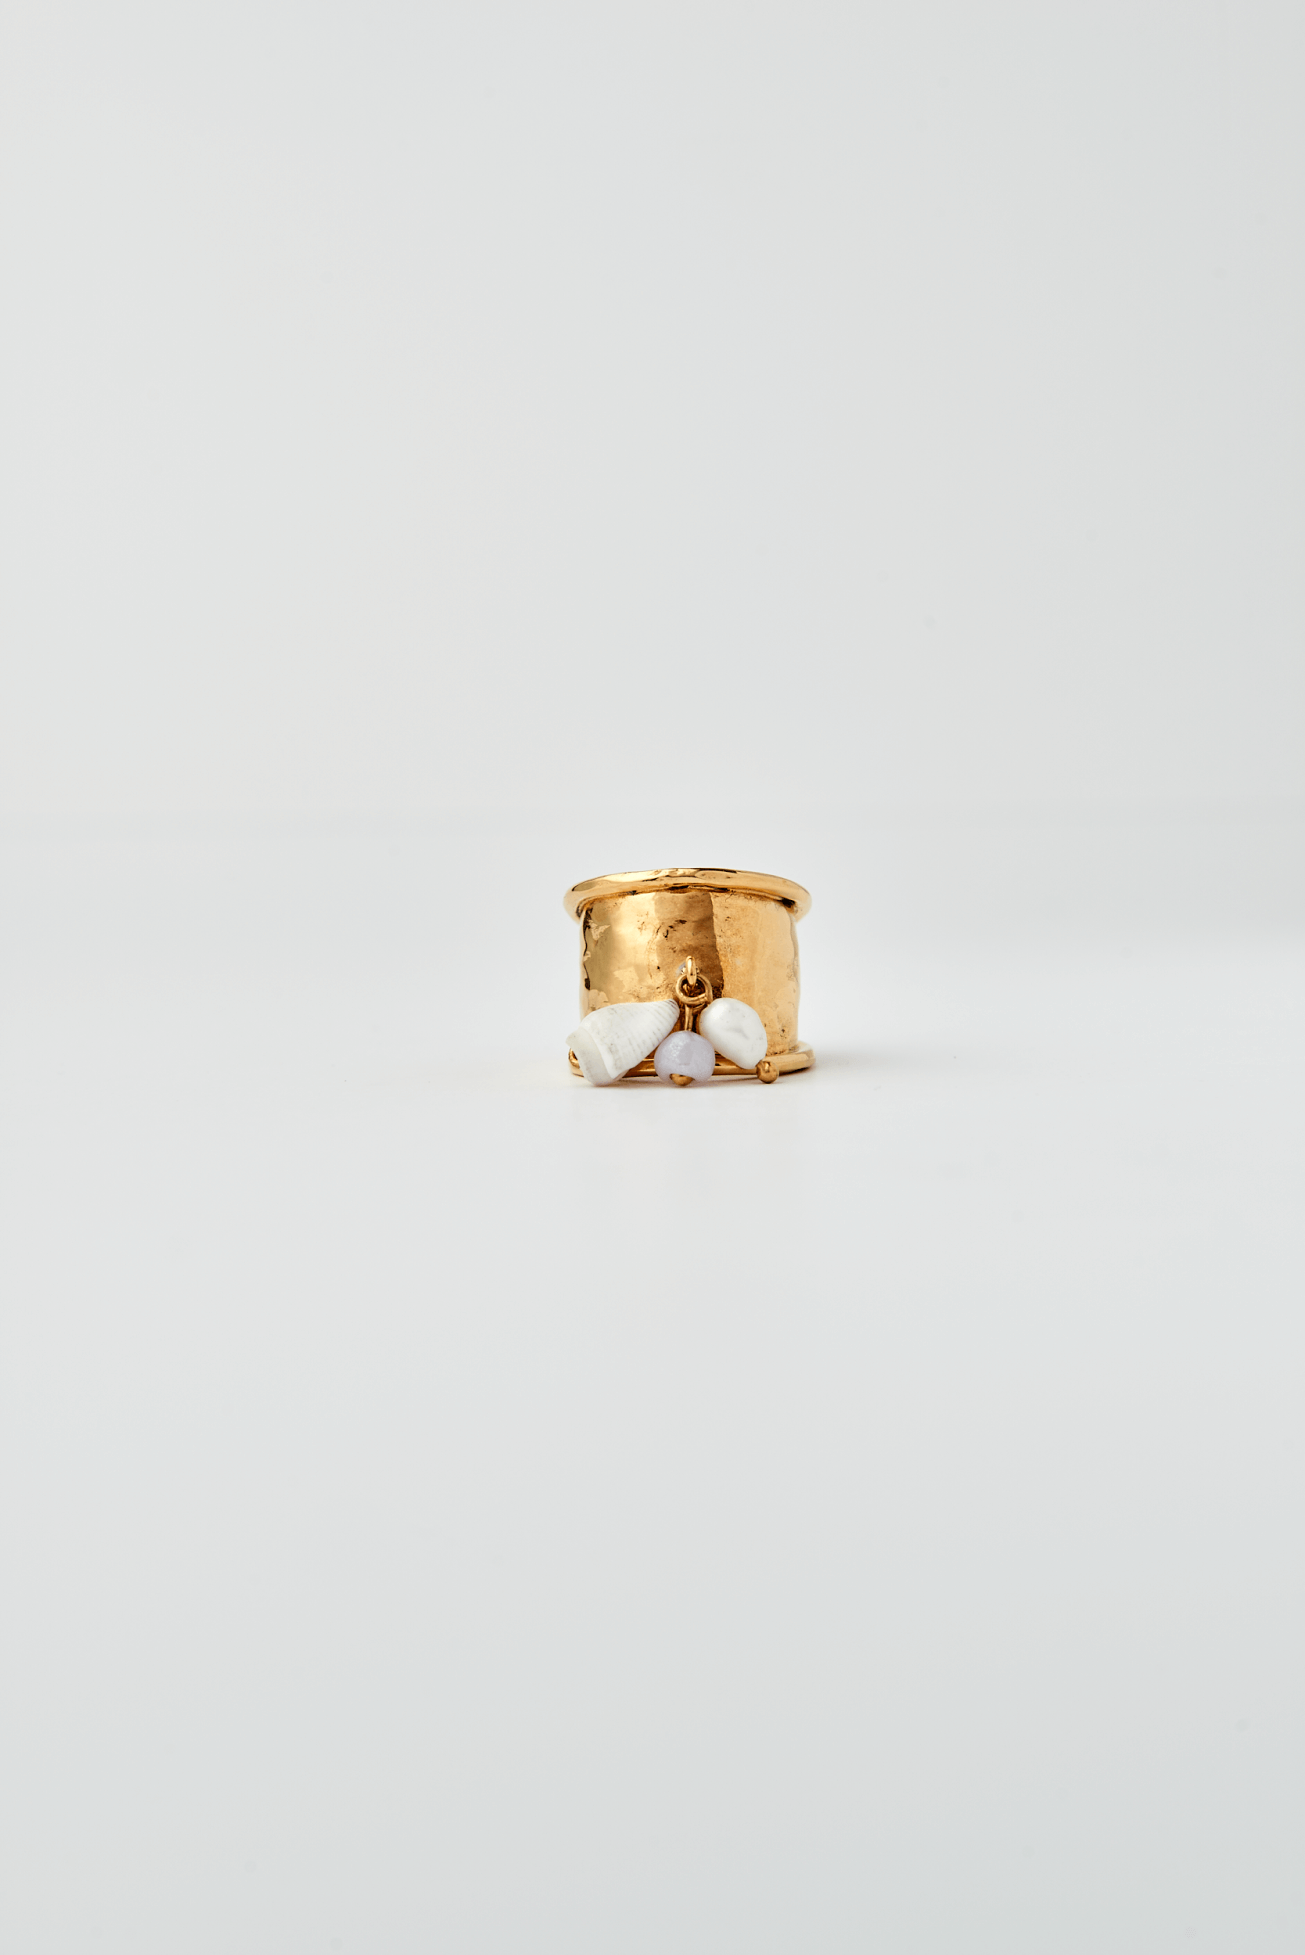 Shop Shell Ring by We Are NBO on Arrai. Discover stylish, affordable clothing, jewelry, handbags and unique handmade pieces from top Kenyan & African fashion brands prioritising sustainability and quality craftsmanship.